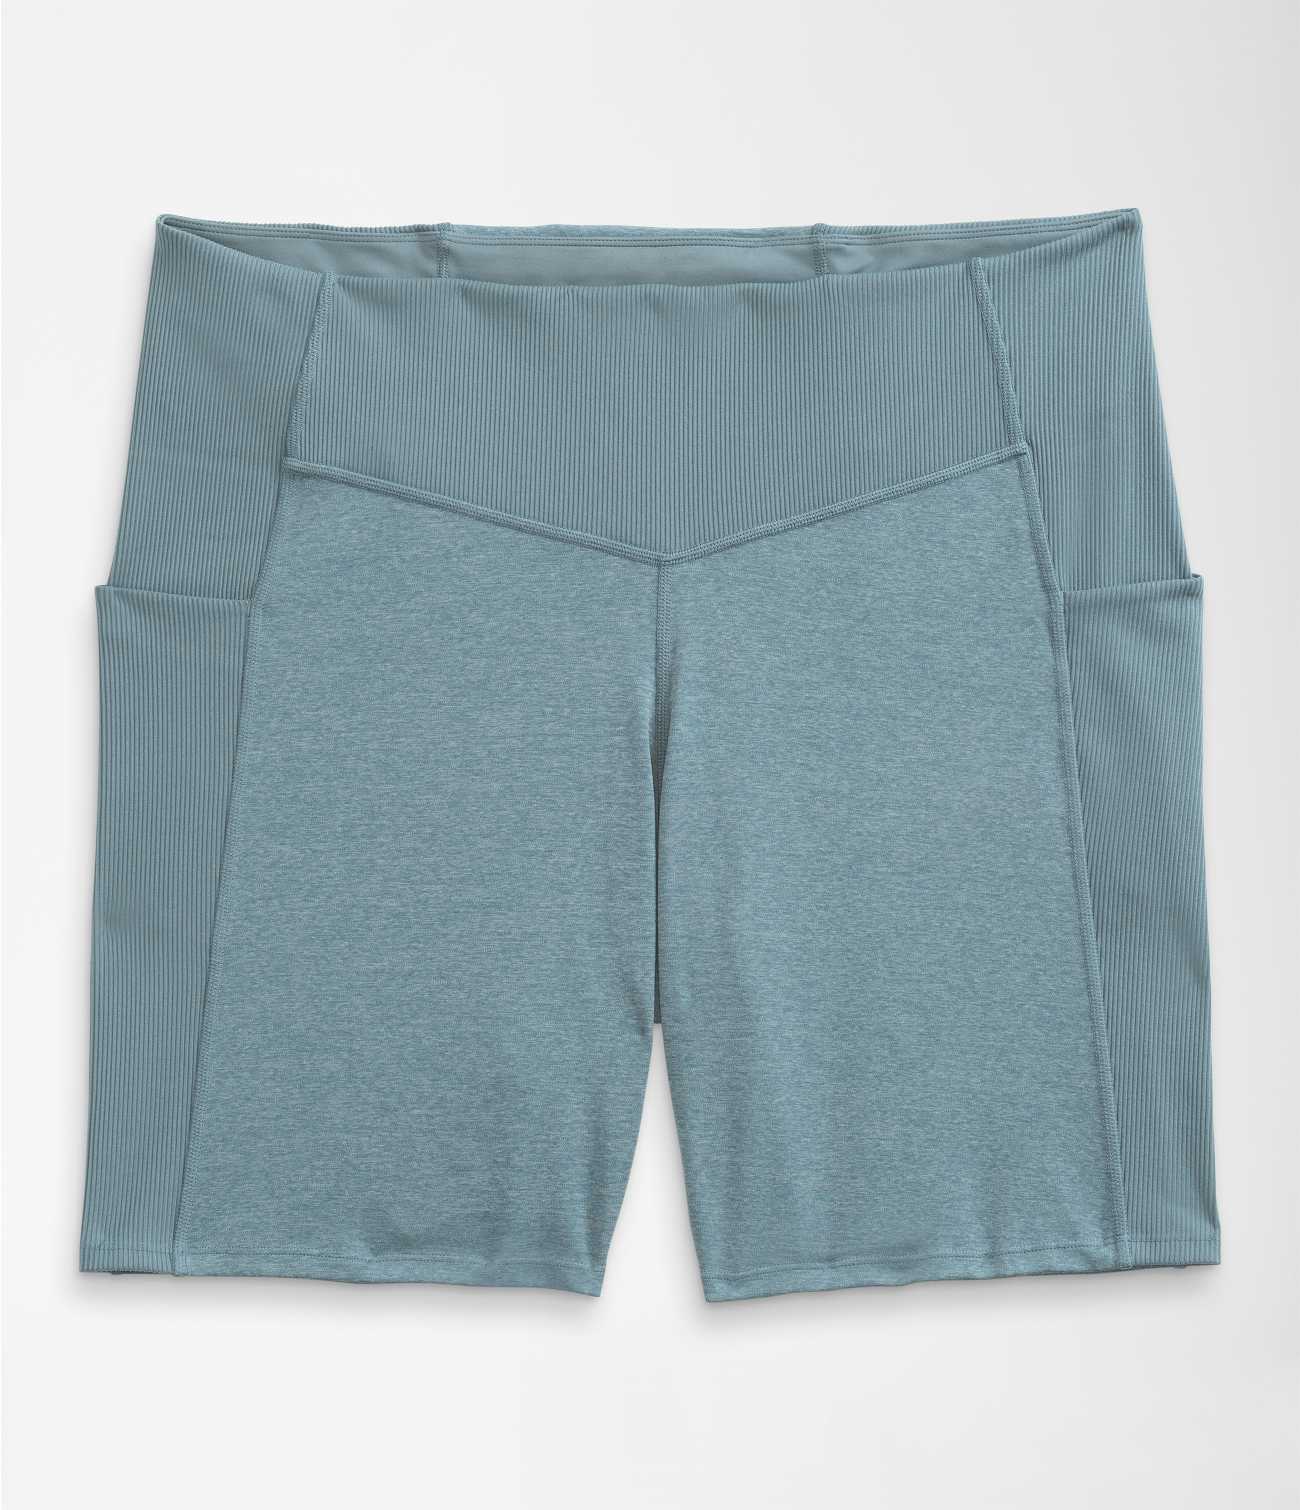 WOMEN'S PLUS DUNE SKY 9 TIGHT SHORT, The North Face